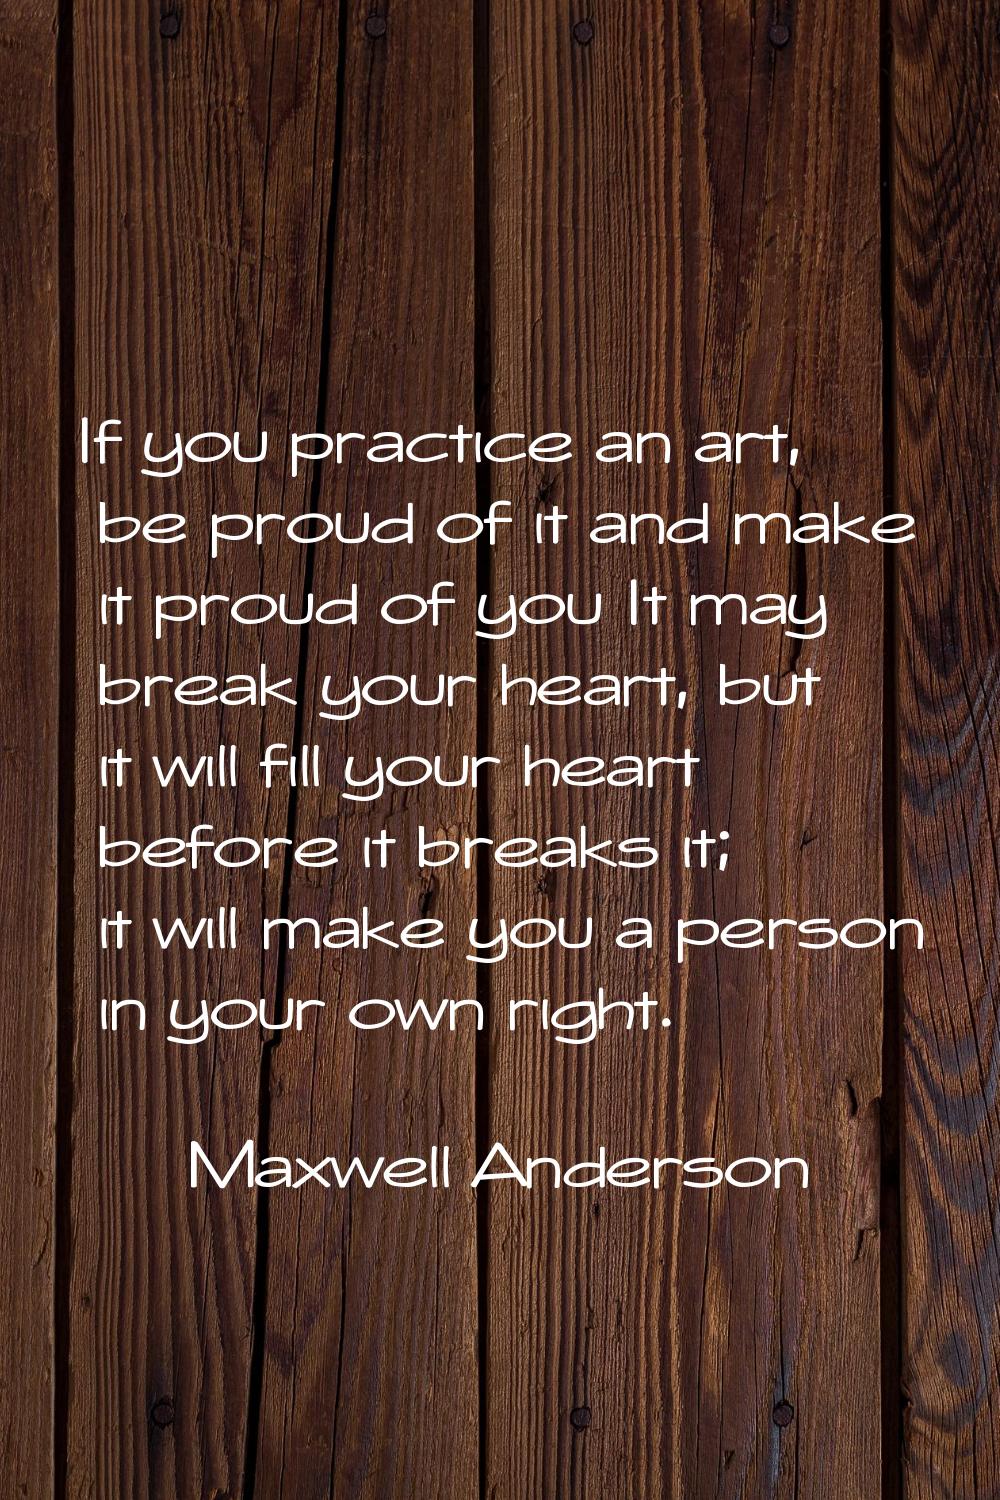 If you practice an art, be proud of it and make it proud of you It may break your heart, but it wil